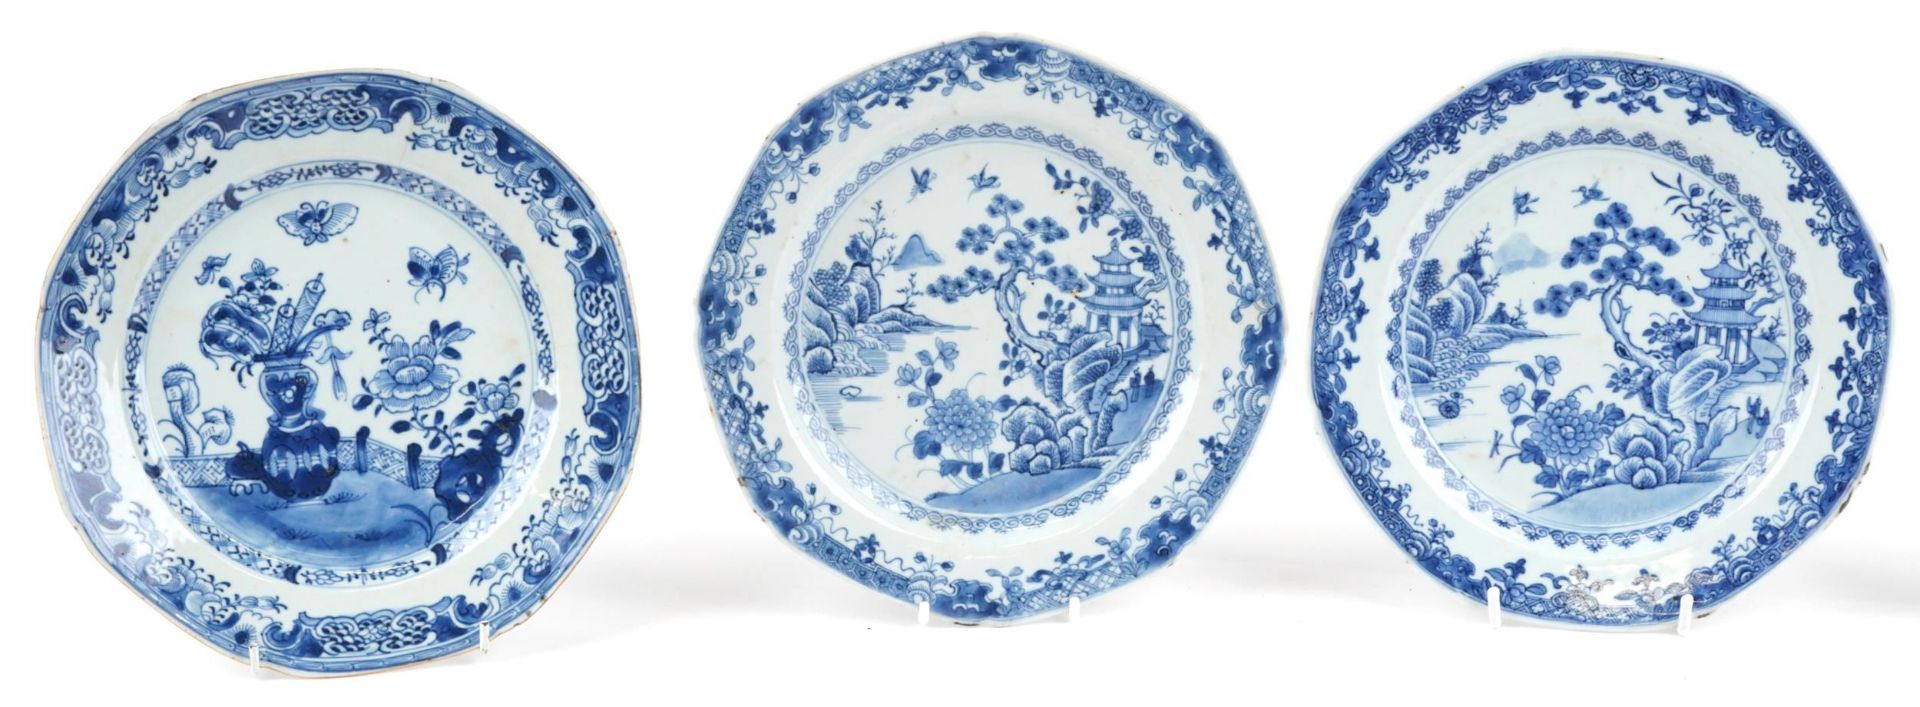 Six Chinese blue and white porcelain plates hand painted with river landscapes and flowers, each - Image 2 of 6